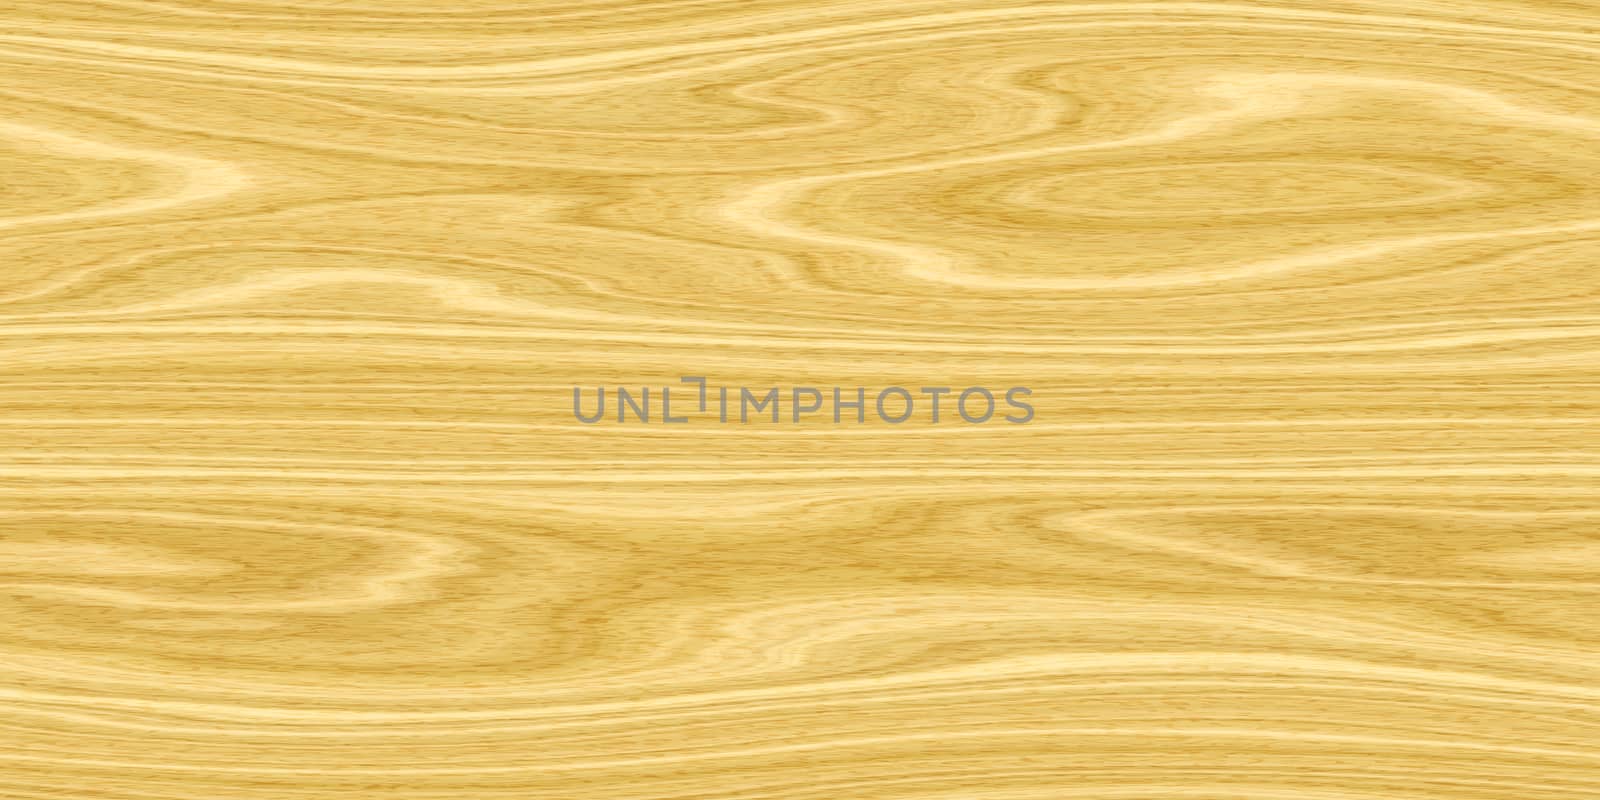 Ash wood surface seamless texture. Ash wooden board panel background. Horizontal along tree fibers direction.